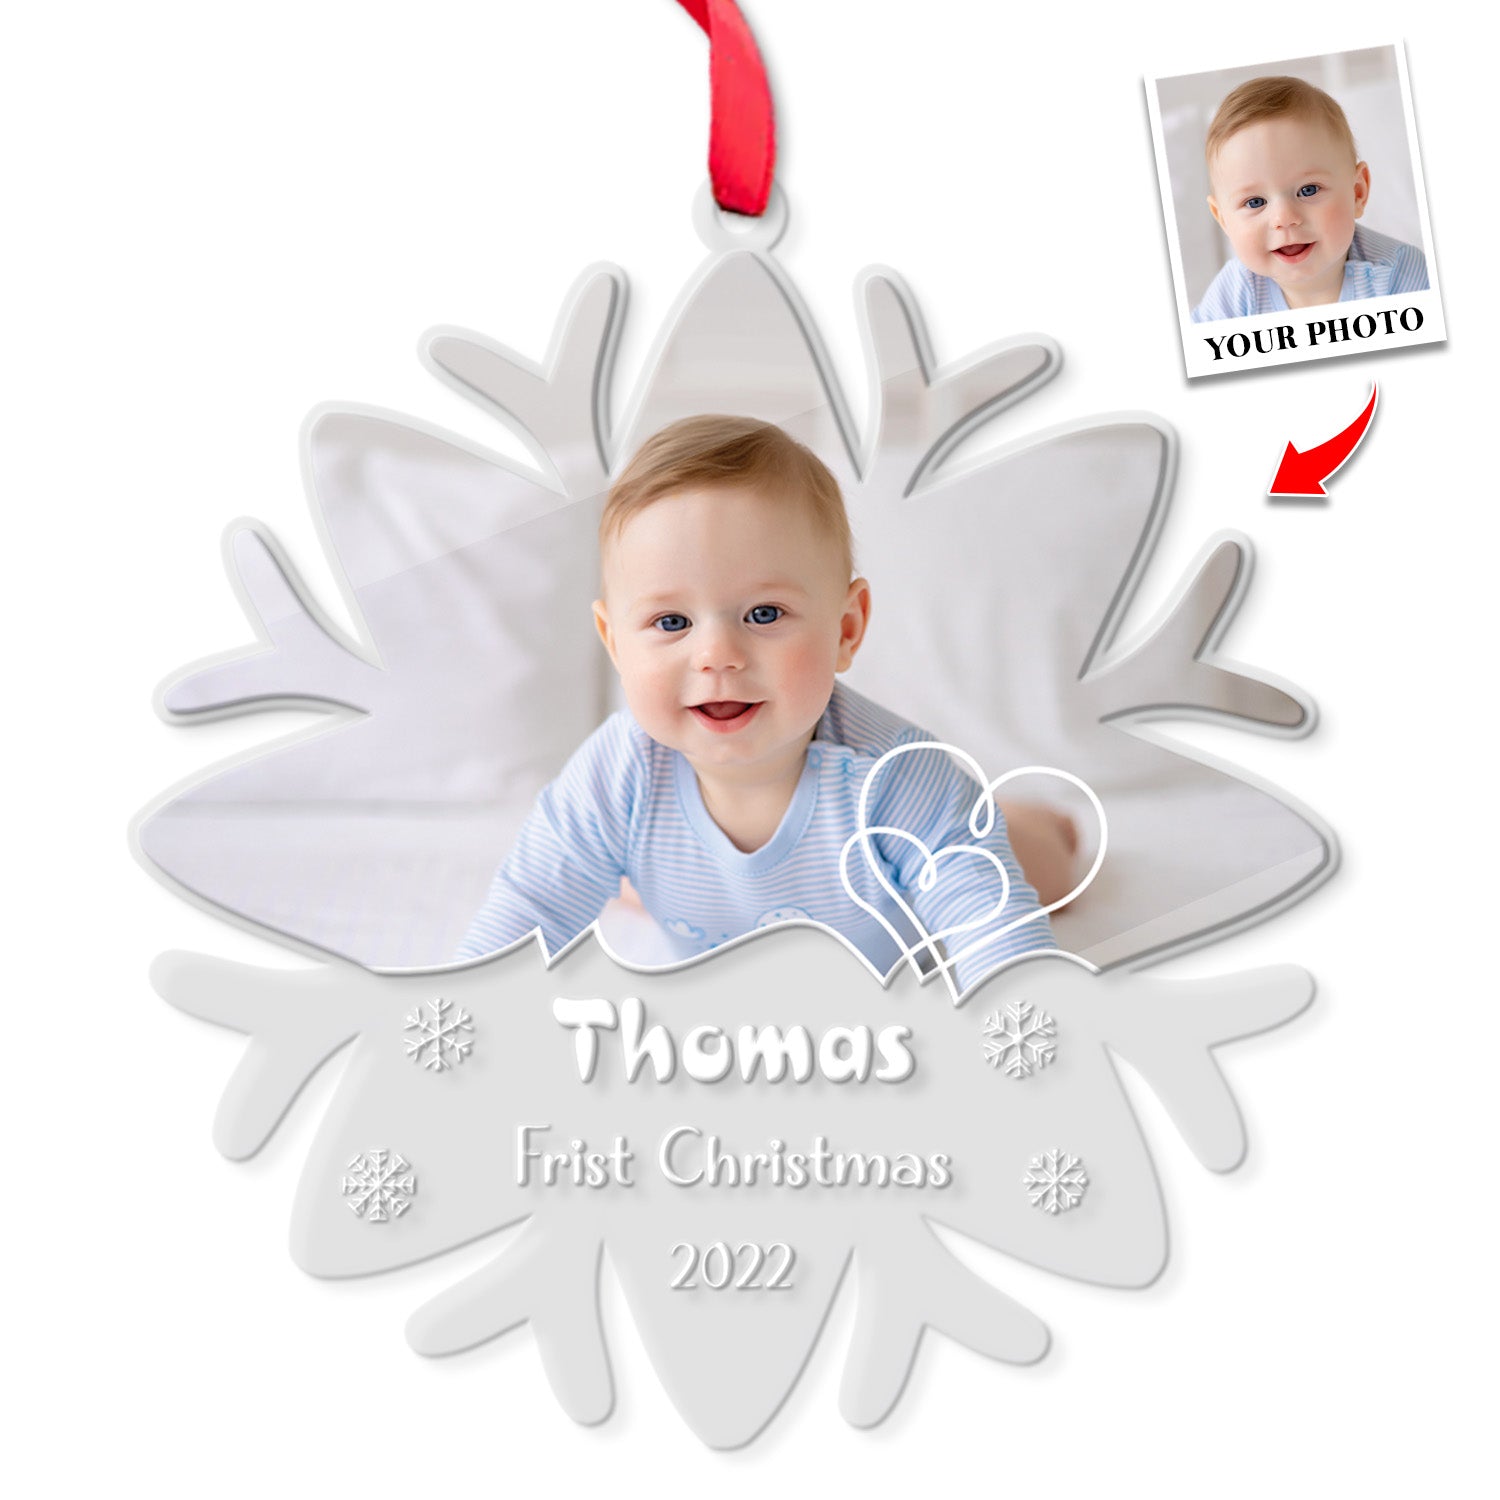 Personalized Name And Photo, Ornament For Baby, Baby's First Christmas, Snowflake, Christmas Shape Ornament 2 Sides